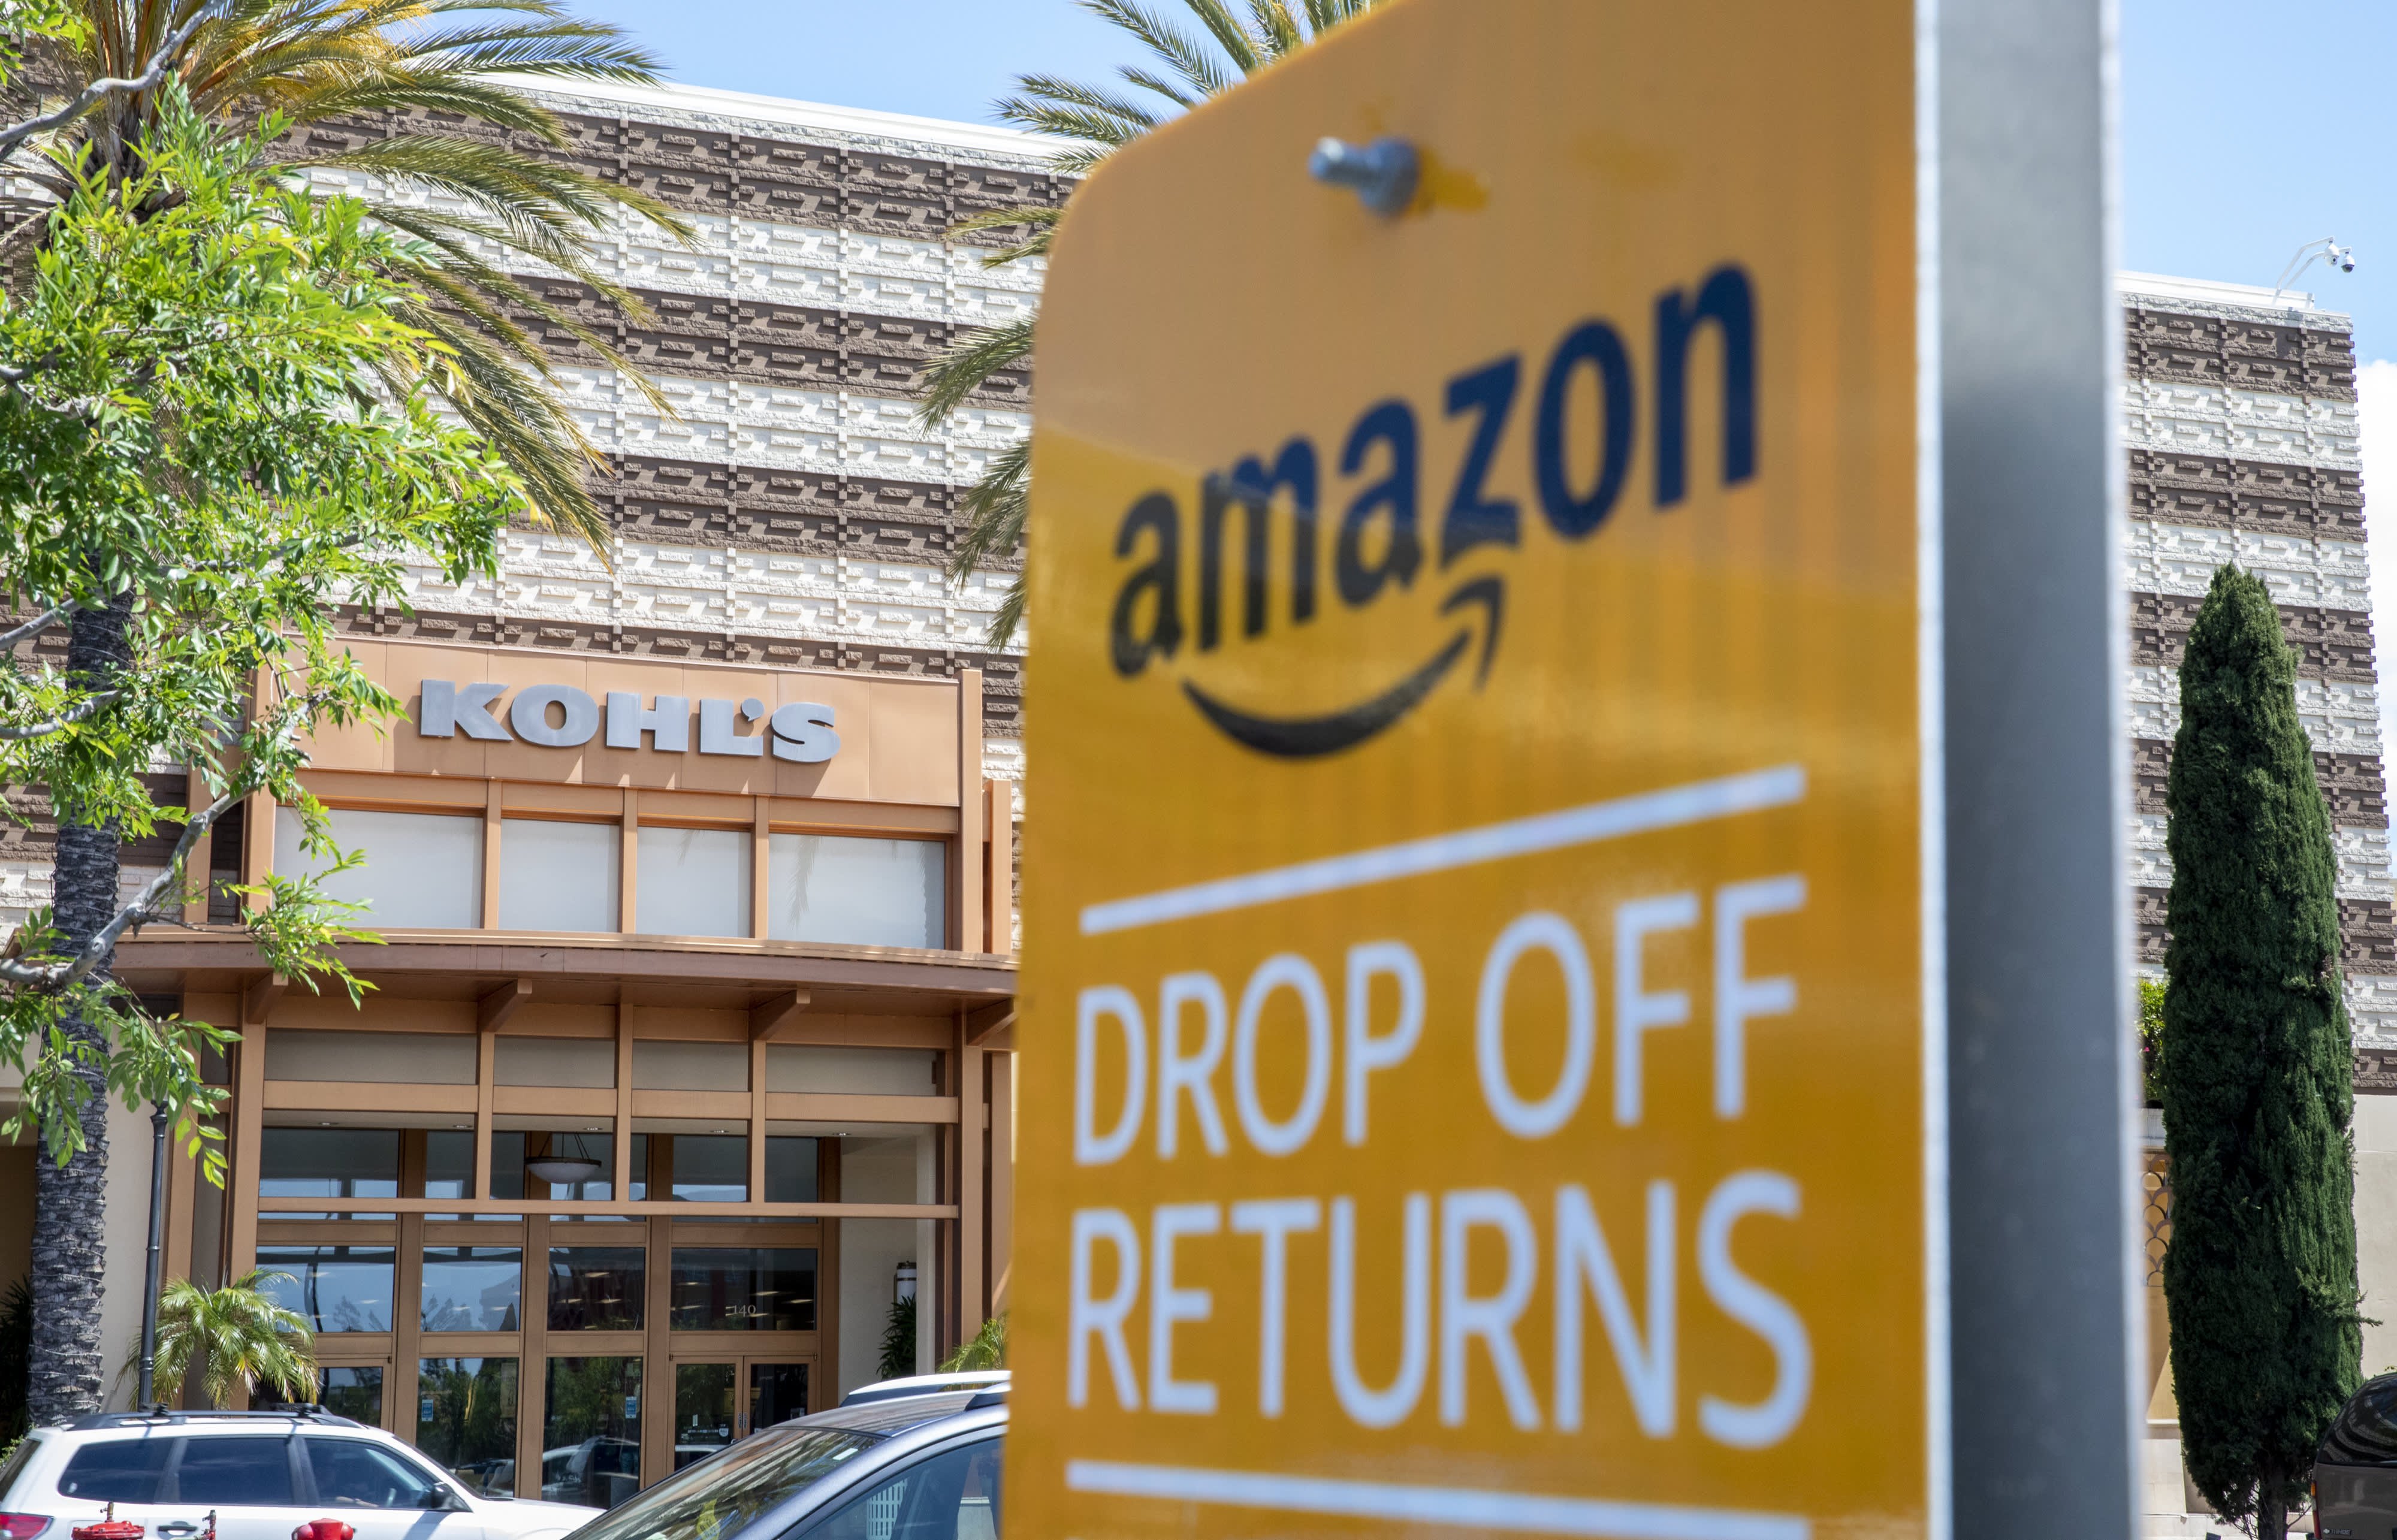 Kohl’s says it has added 2 million new customers in 2020, thanks to Amazon